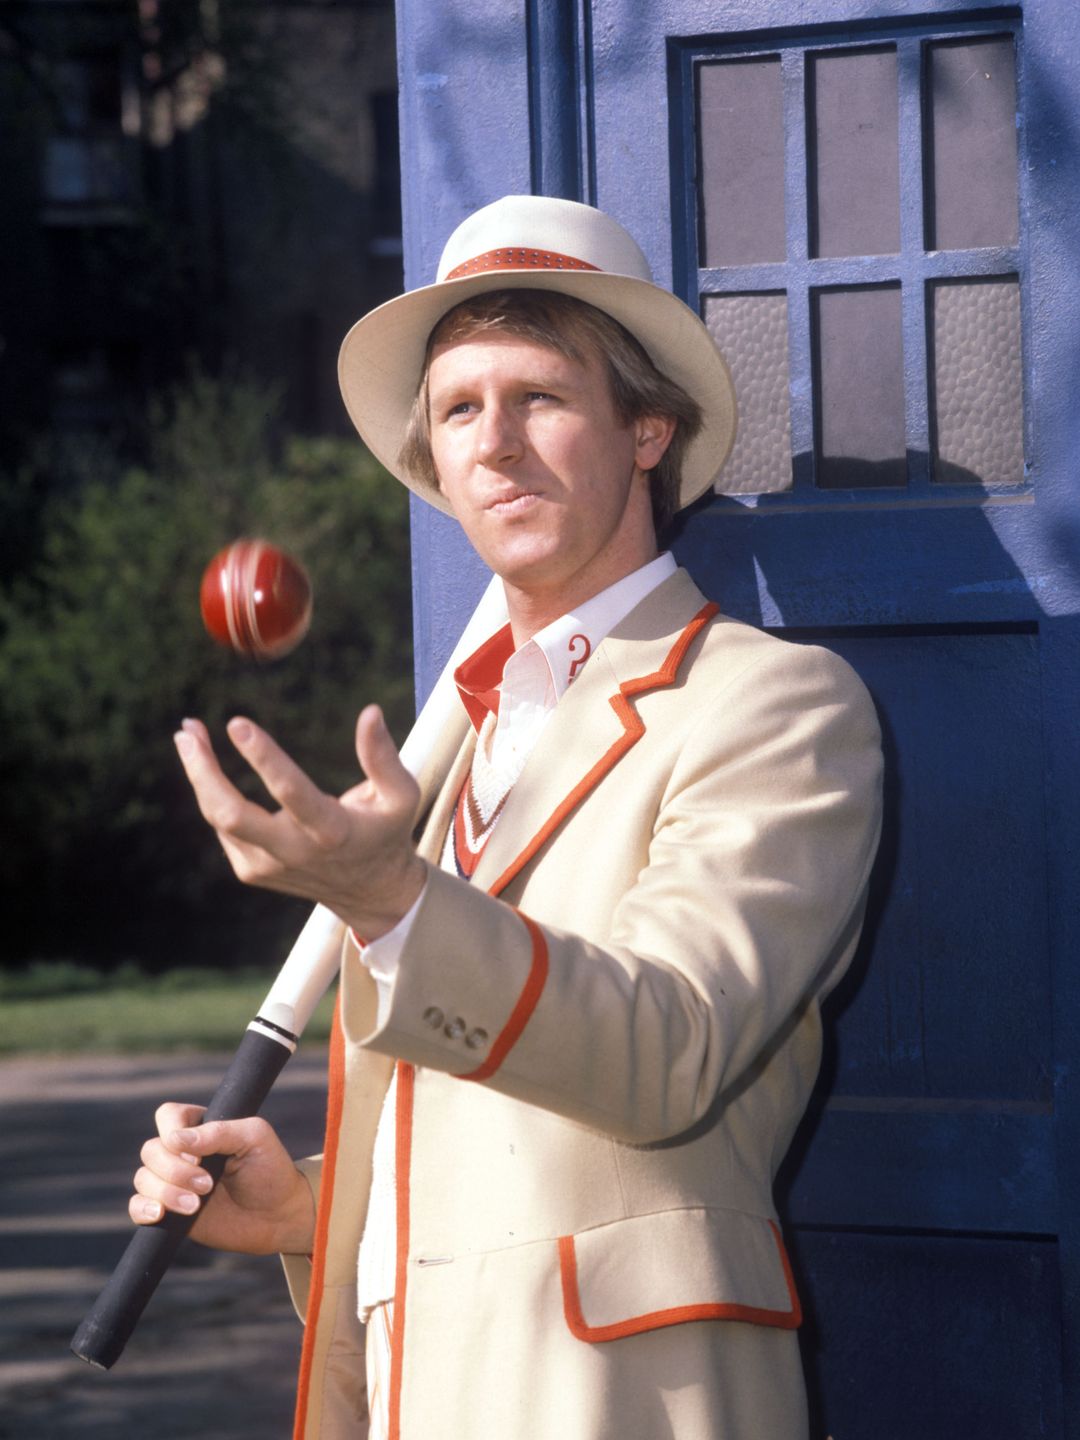 Peter Davison in character as The Doctor with a cricket ball